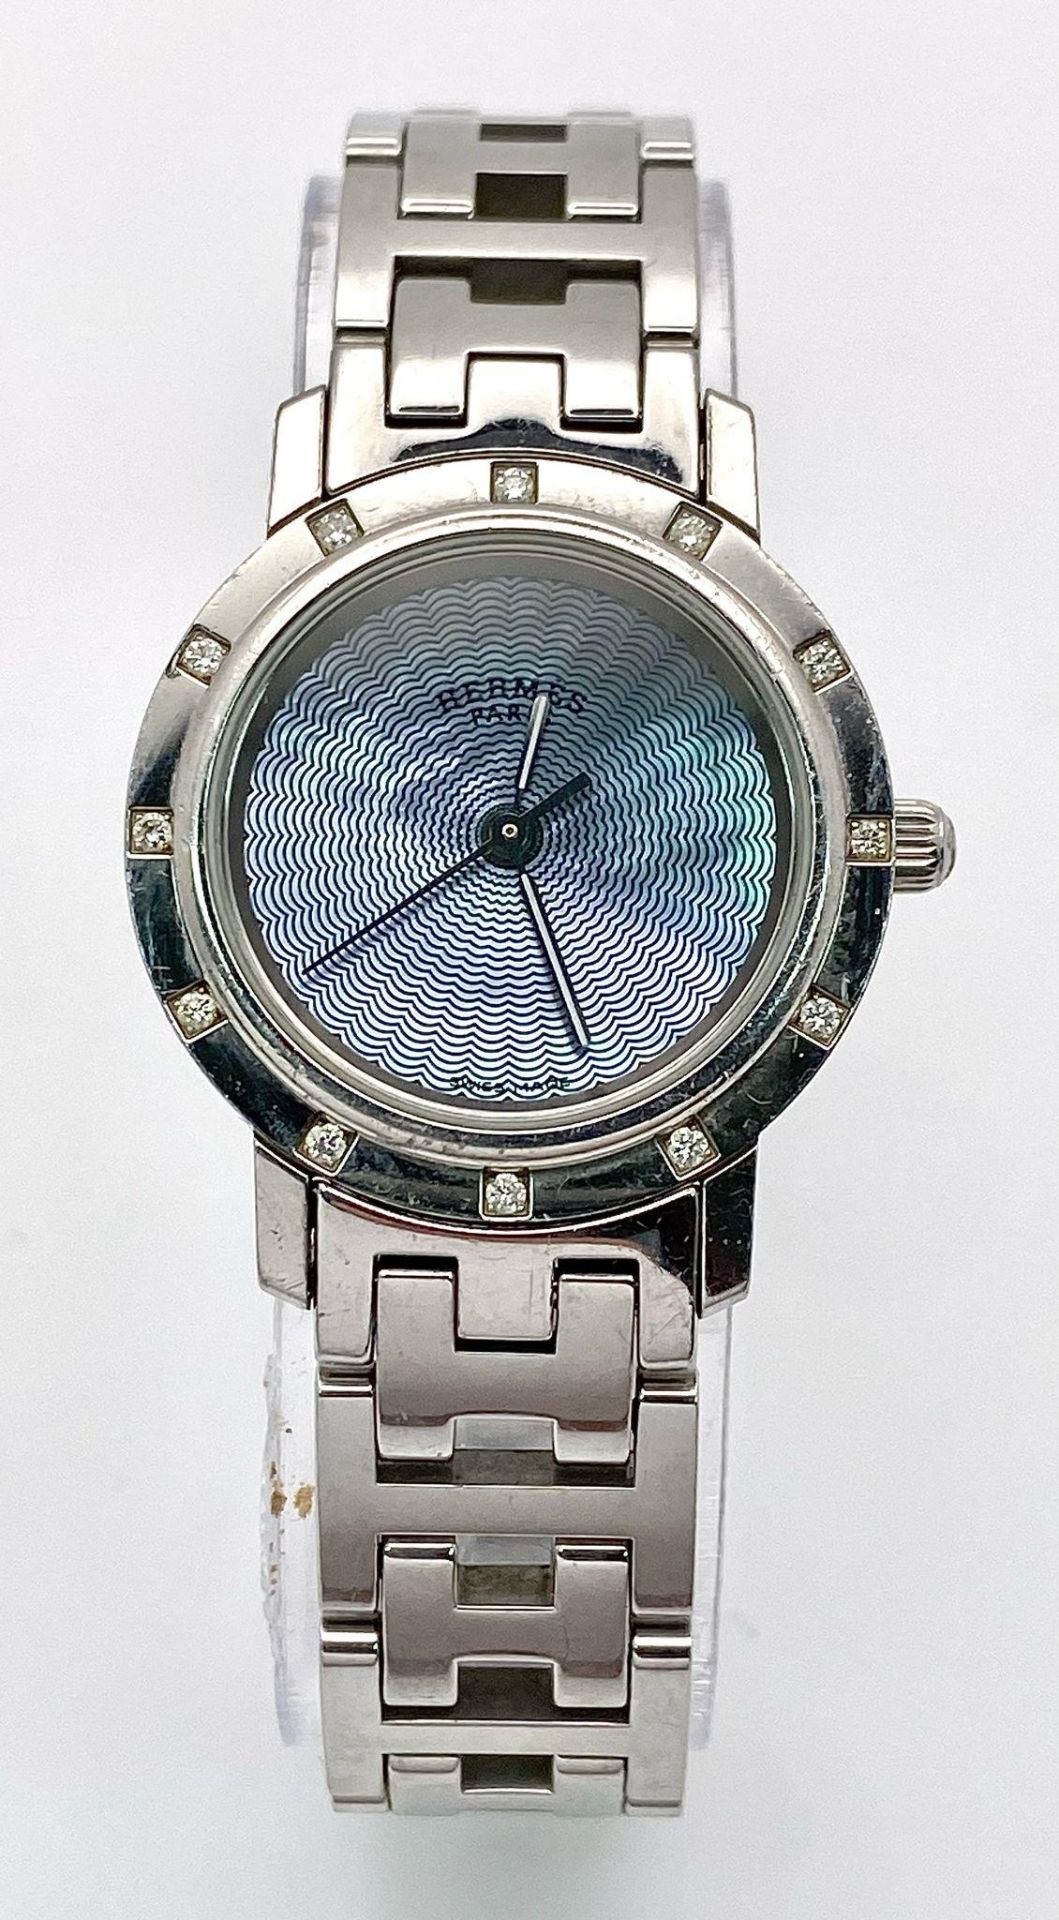 A "HERMES" STAINLESS STEEL LADIES QUARTZ WATCH WITH DIAMOND OUTER BEZEL. 24mm - Image 2 of 8